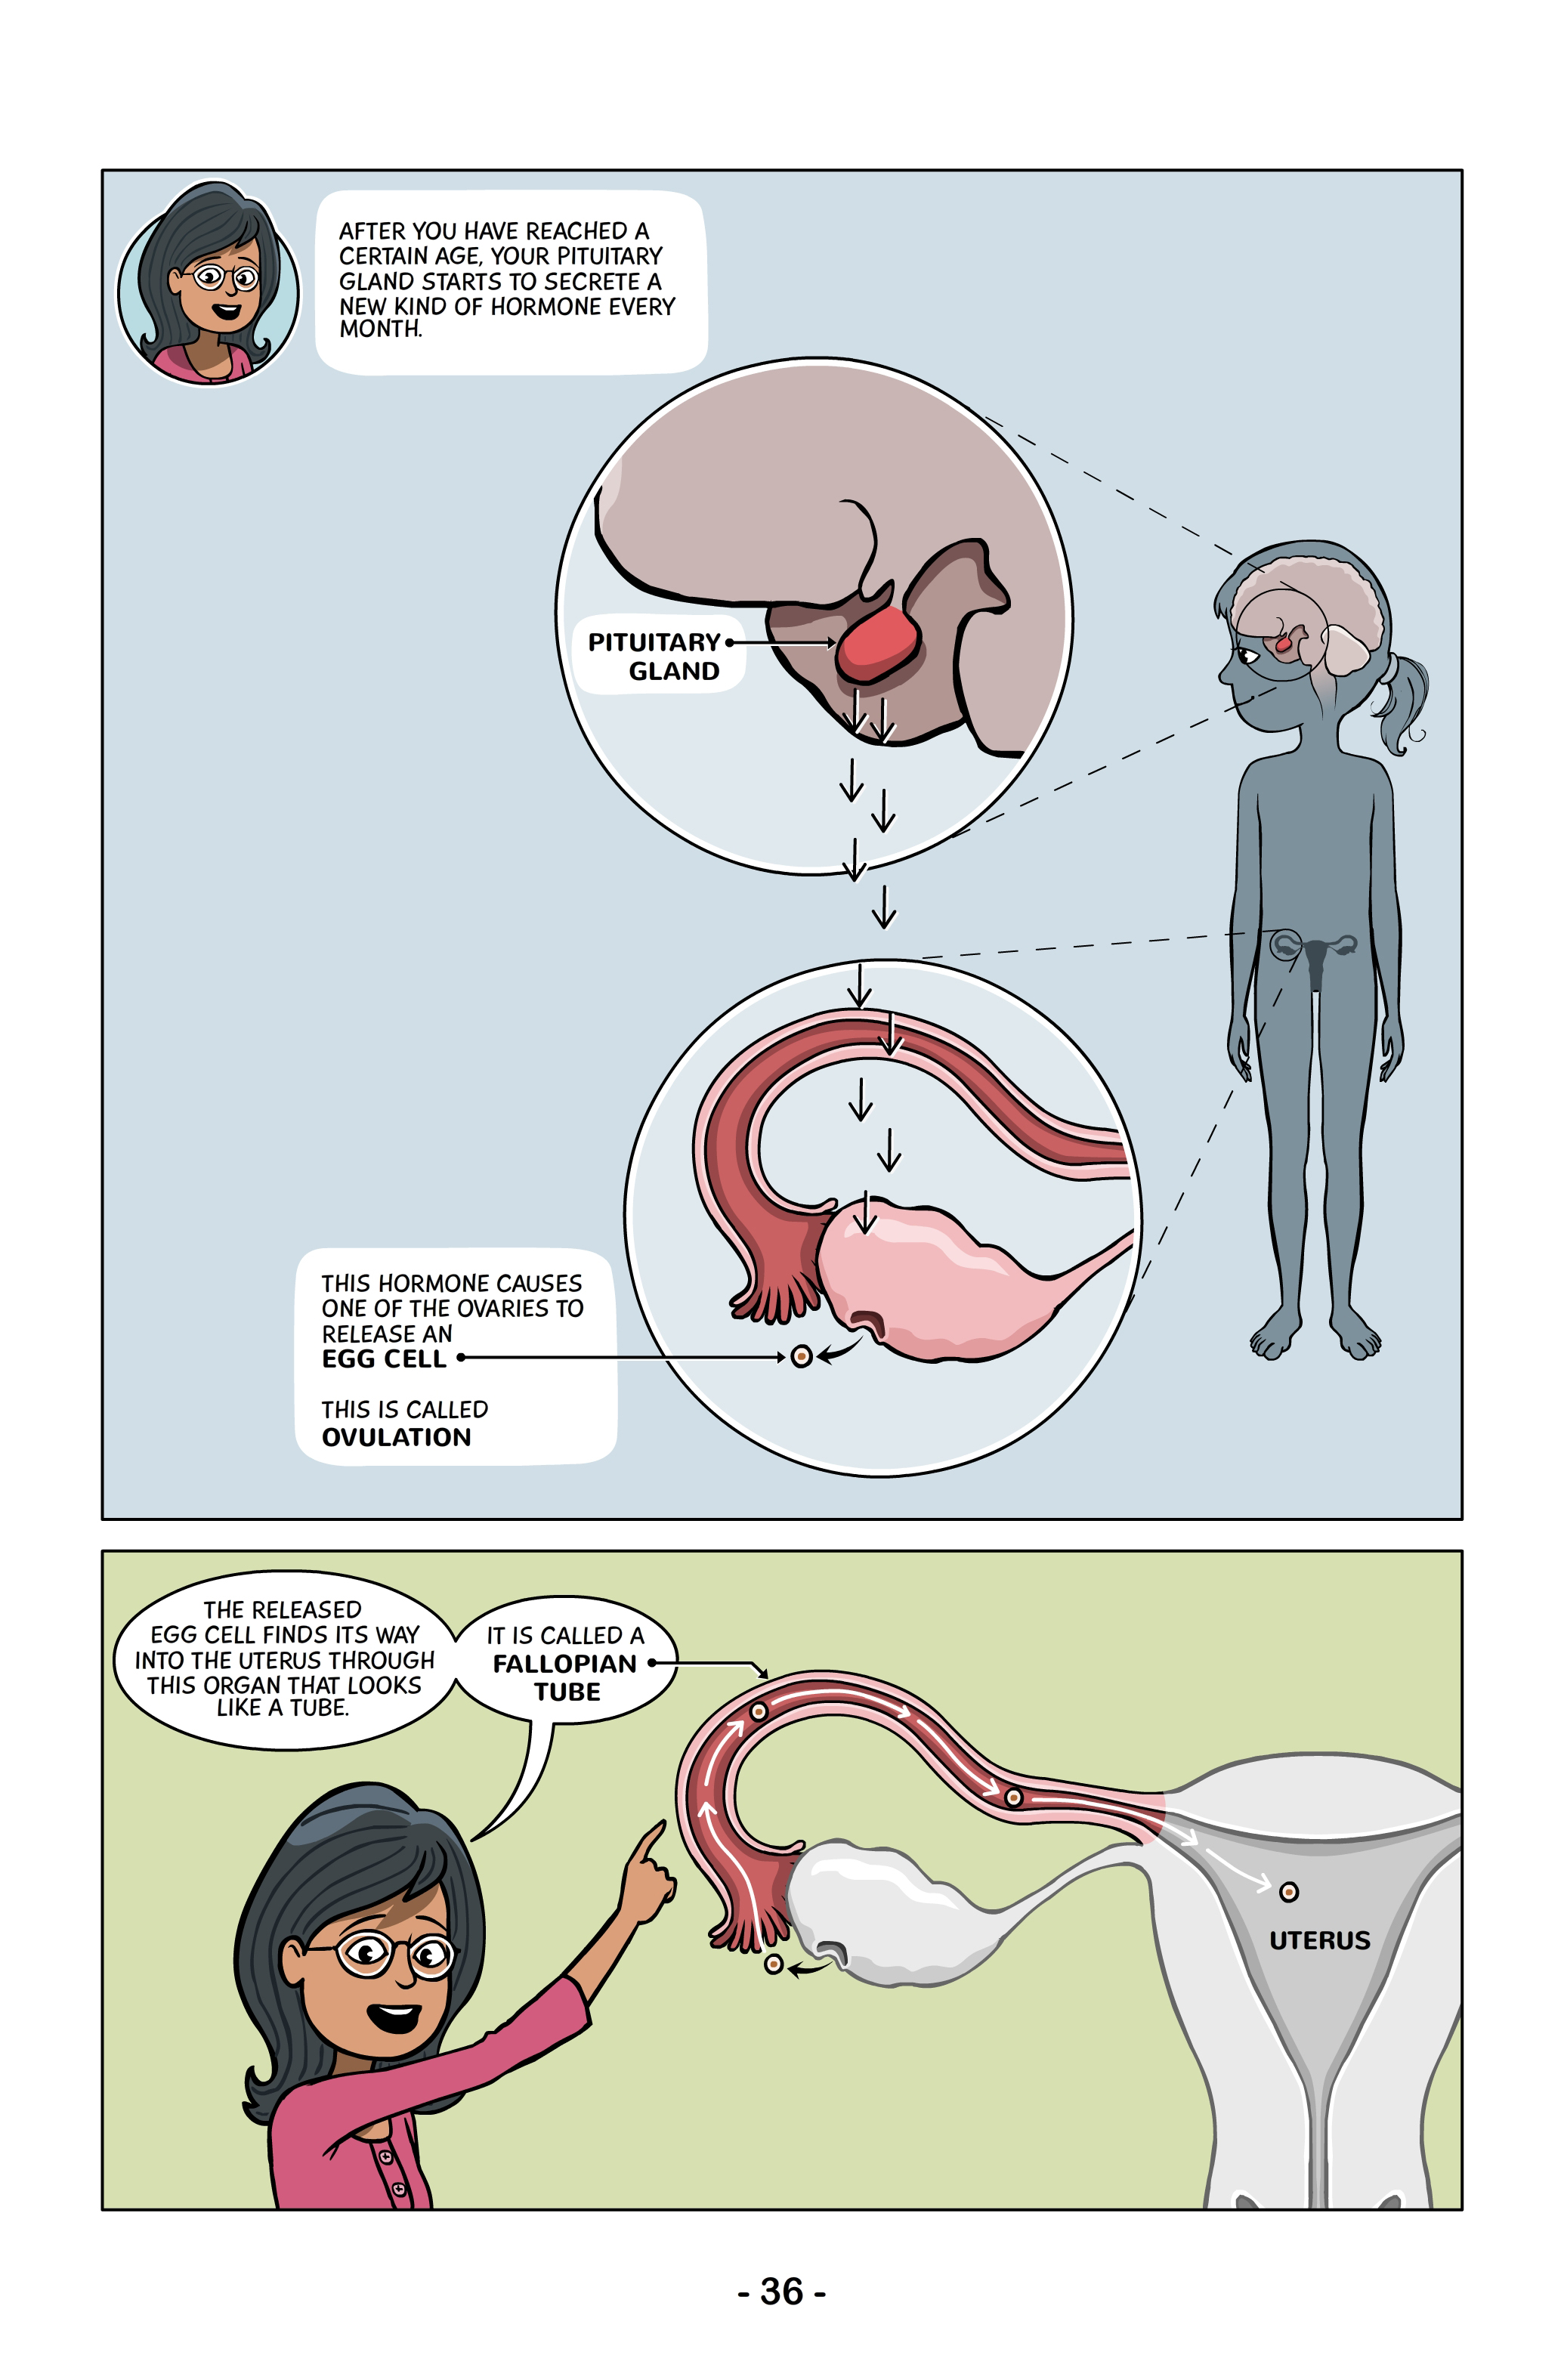 Recent research carried out to coincide with Menstrual Hygiene Day reported only 2.5% of schoolgirls across South Asia knew that menstrual blood came from the uterus. Gupta's Menstrupedia Comic is intended to be used as an educational guide to raise awareness and dispel the myths that surround menstruation and women's health. (Courtesy of Menstrupedia)